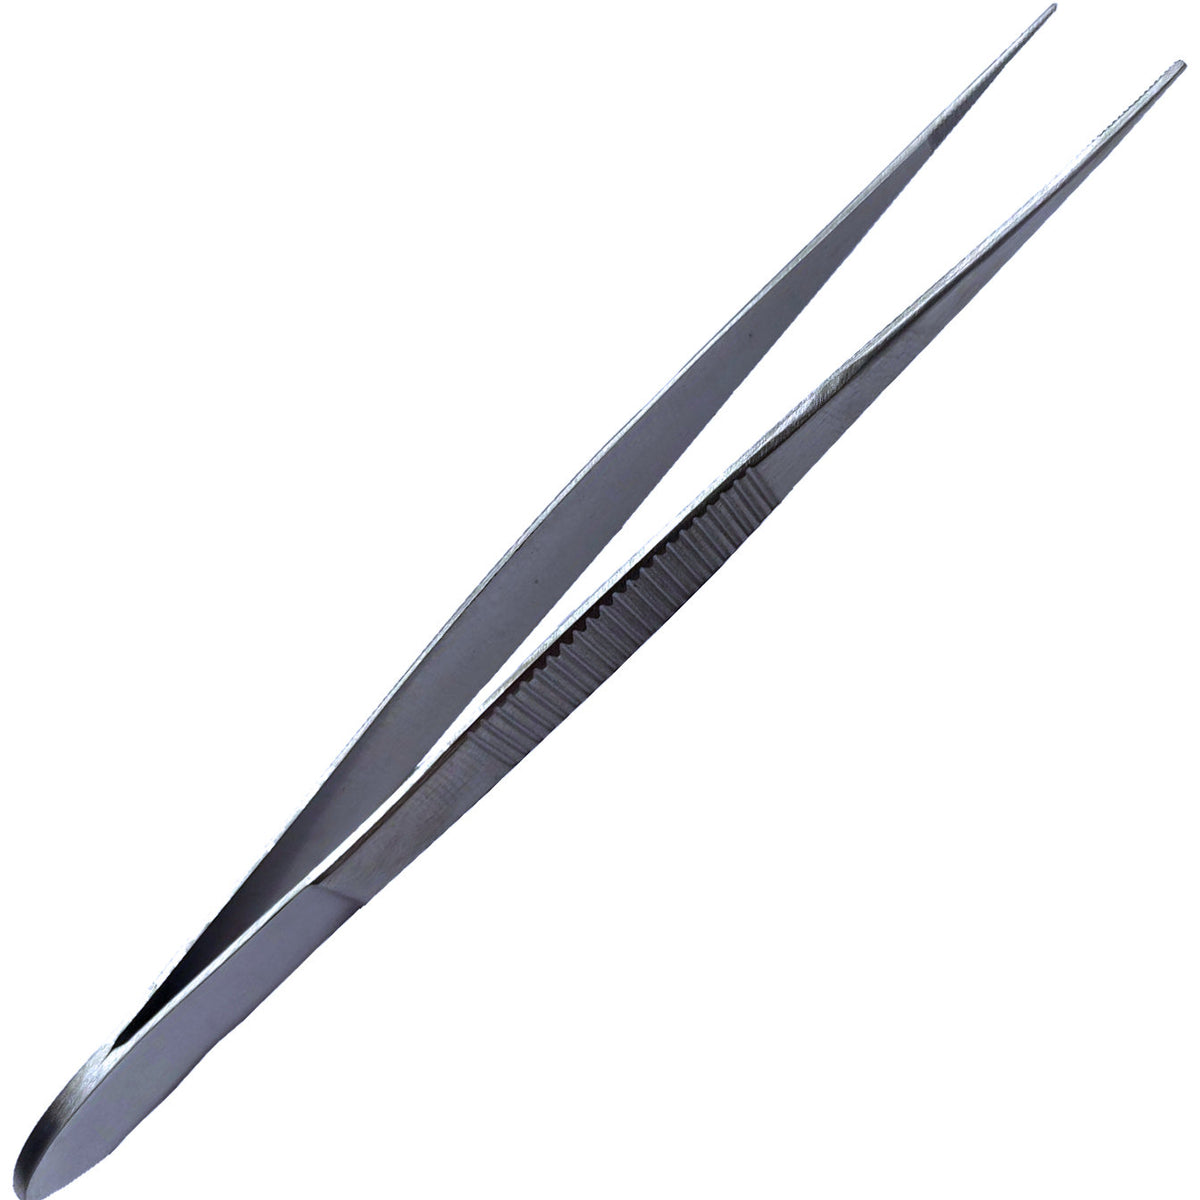 2 set of Sewing Machine Tweezers all steel, bent perfect for